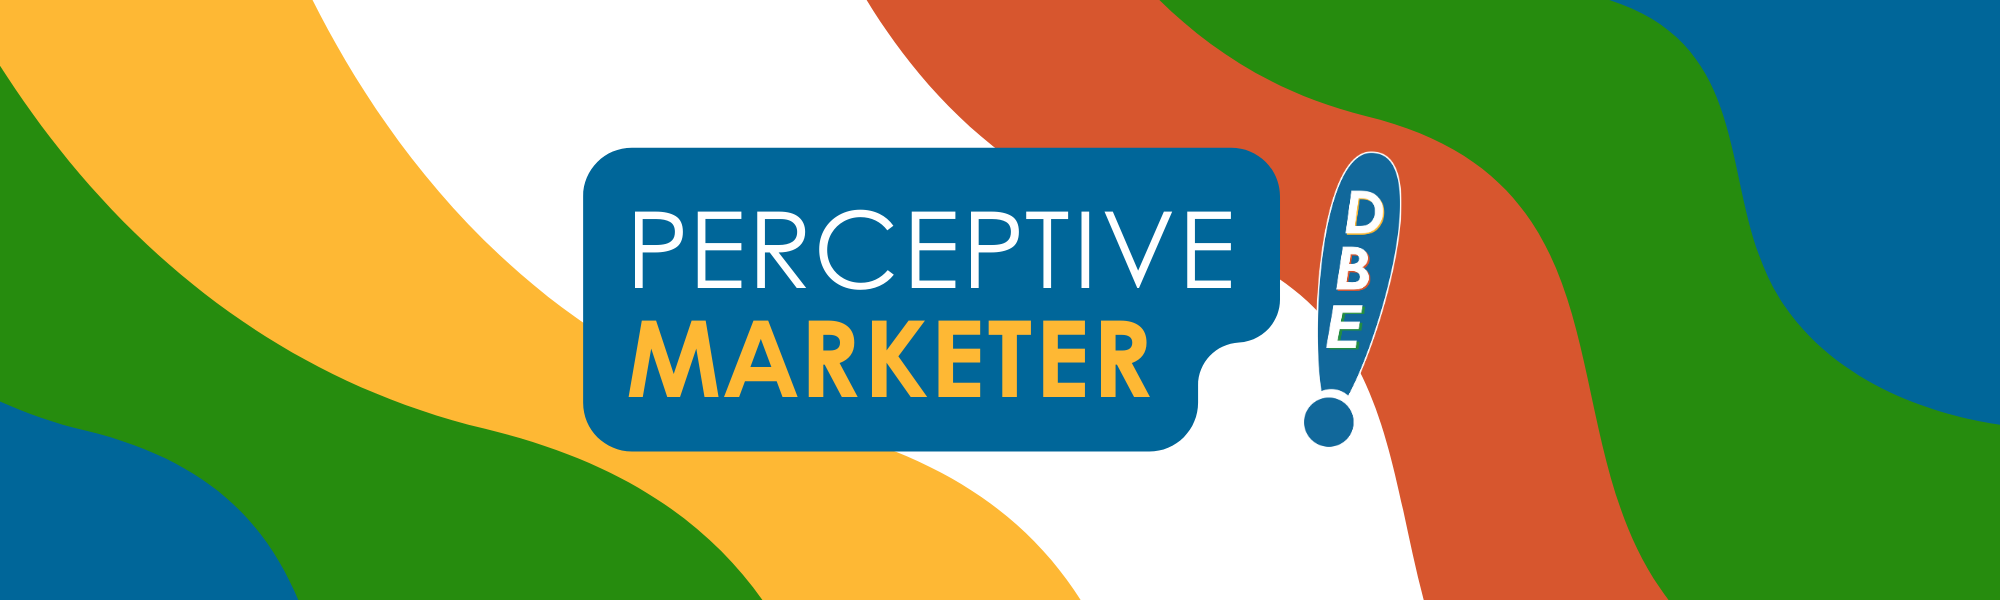 Perceptive Marketer Logo on a colorful orange, blue, green, and yellow wavy background